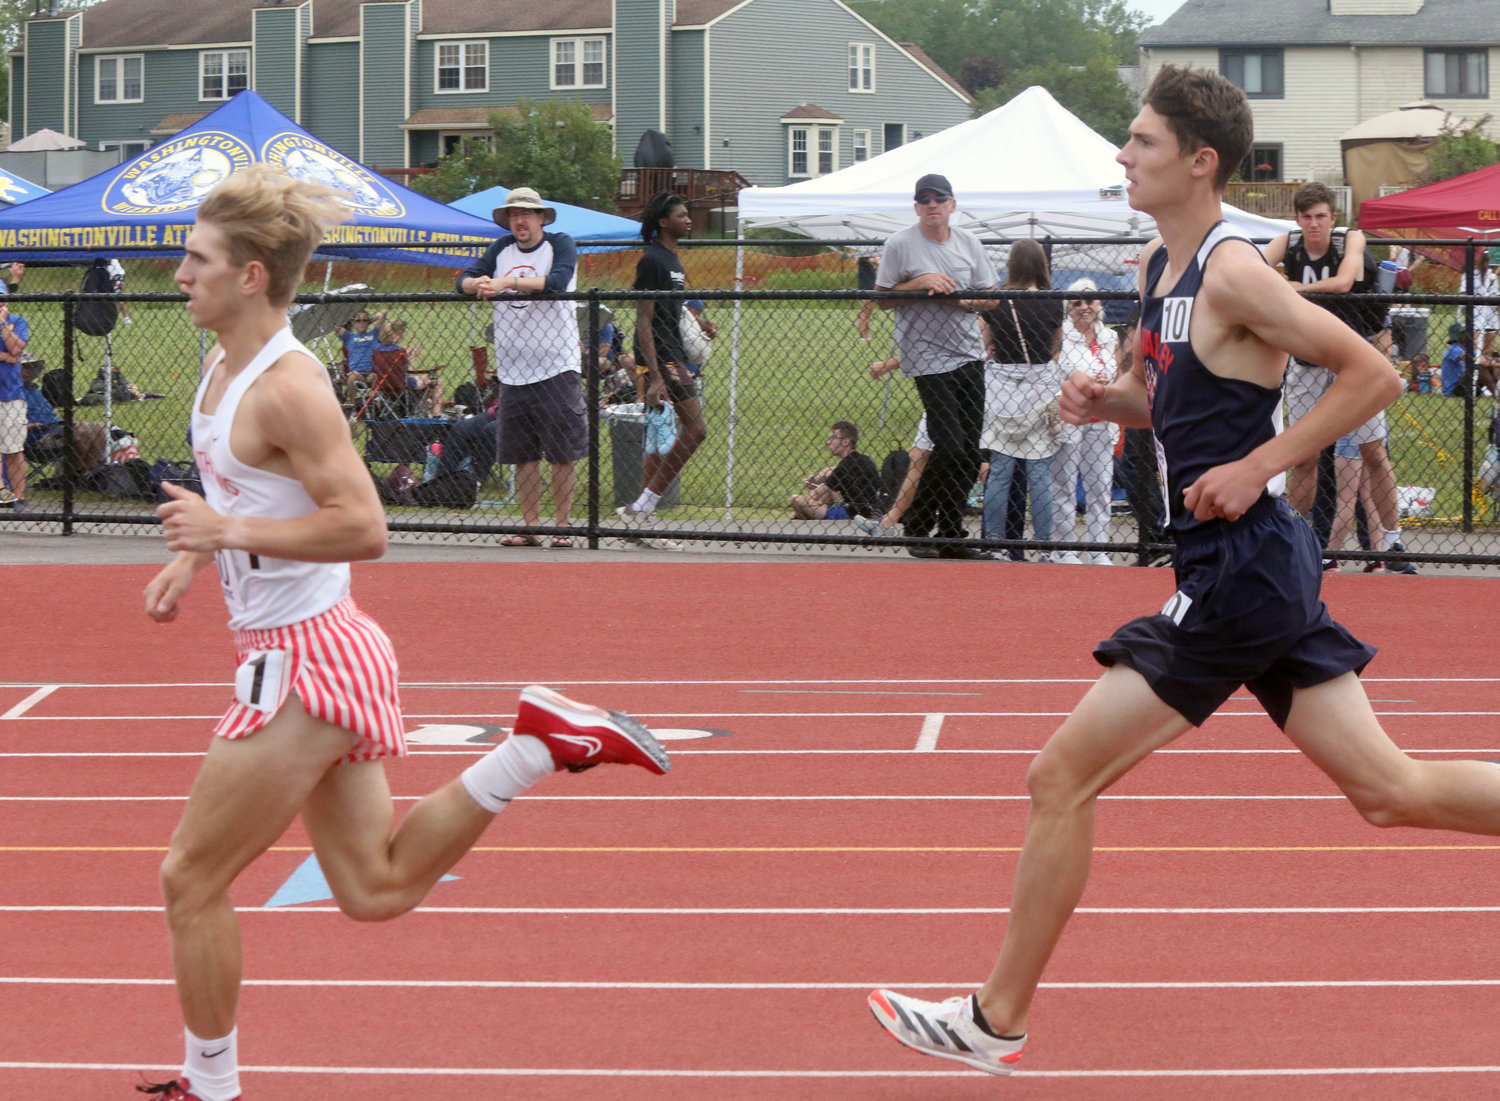 Tri-Valley junior Adam Furman won two medals at states. He finished second among the D2 contenders in the 3200 and sixth among the D2 racers in the 1600.